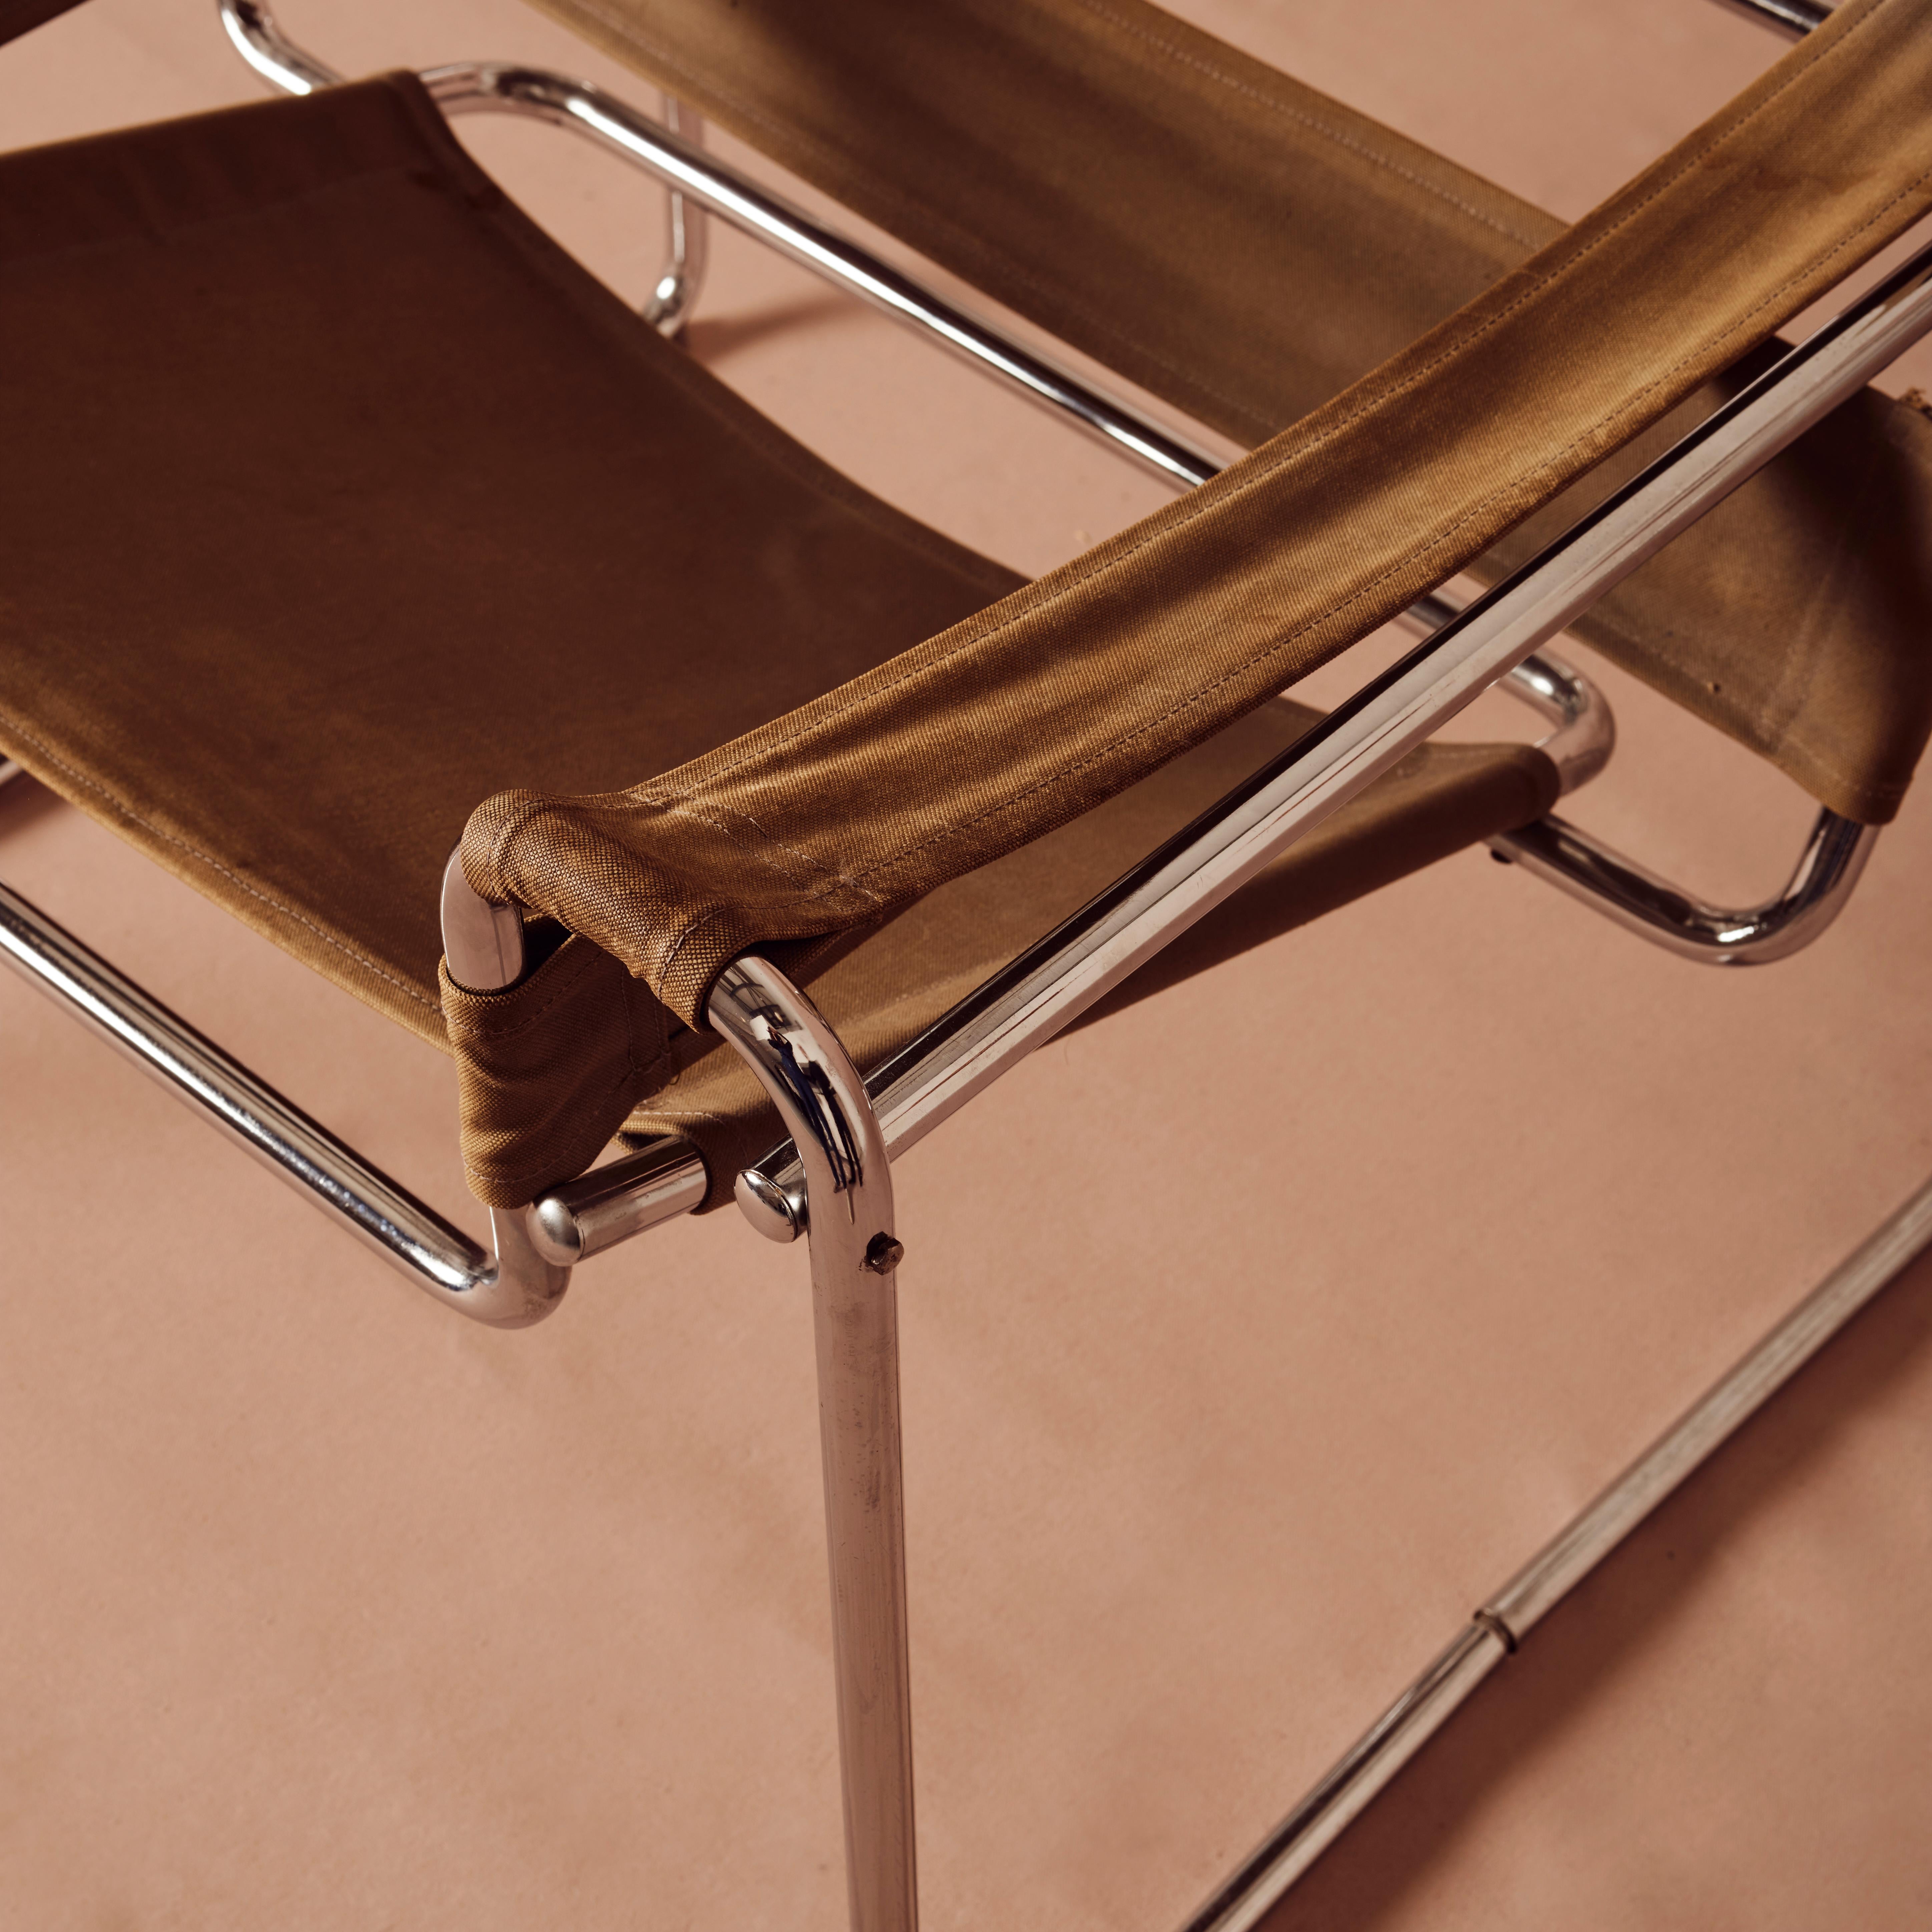 The Wassily Chair, also known as the Model B3 chair, is a famous and iconic piece of modern furniture design. It was designed by Marcel Breuer in 1925-1926 while he was working at the Bauhaus, a renowned German art school that played a significant